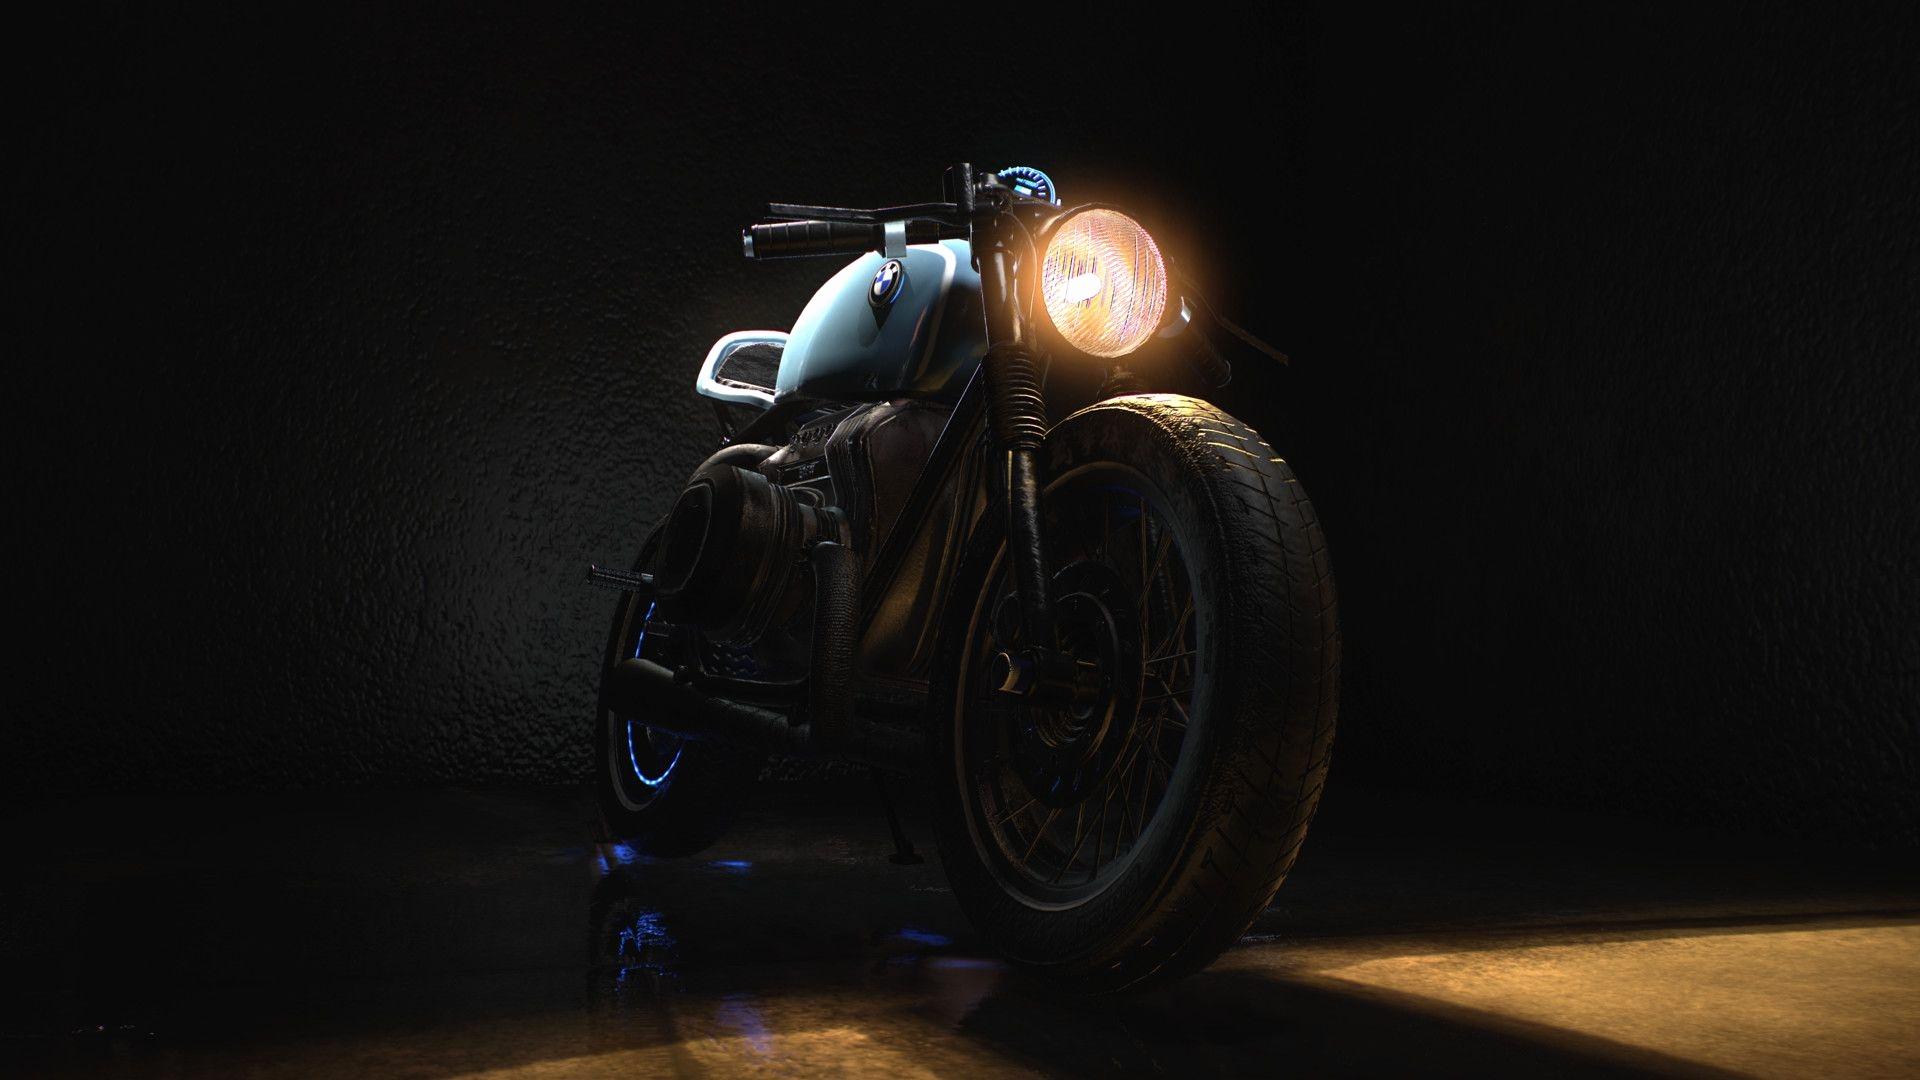 Cafe Racer Wallpaper Fresh Cafe Racer Wallpaper HD Of the Day of The Hudson